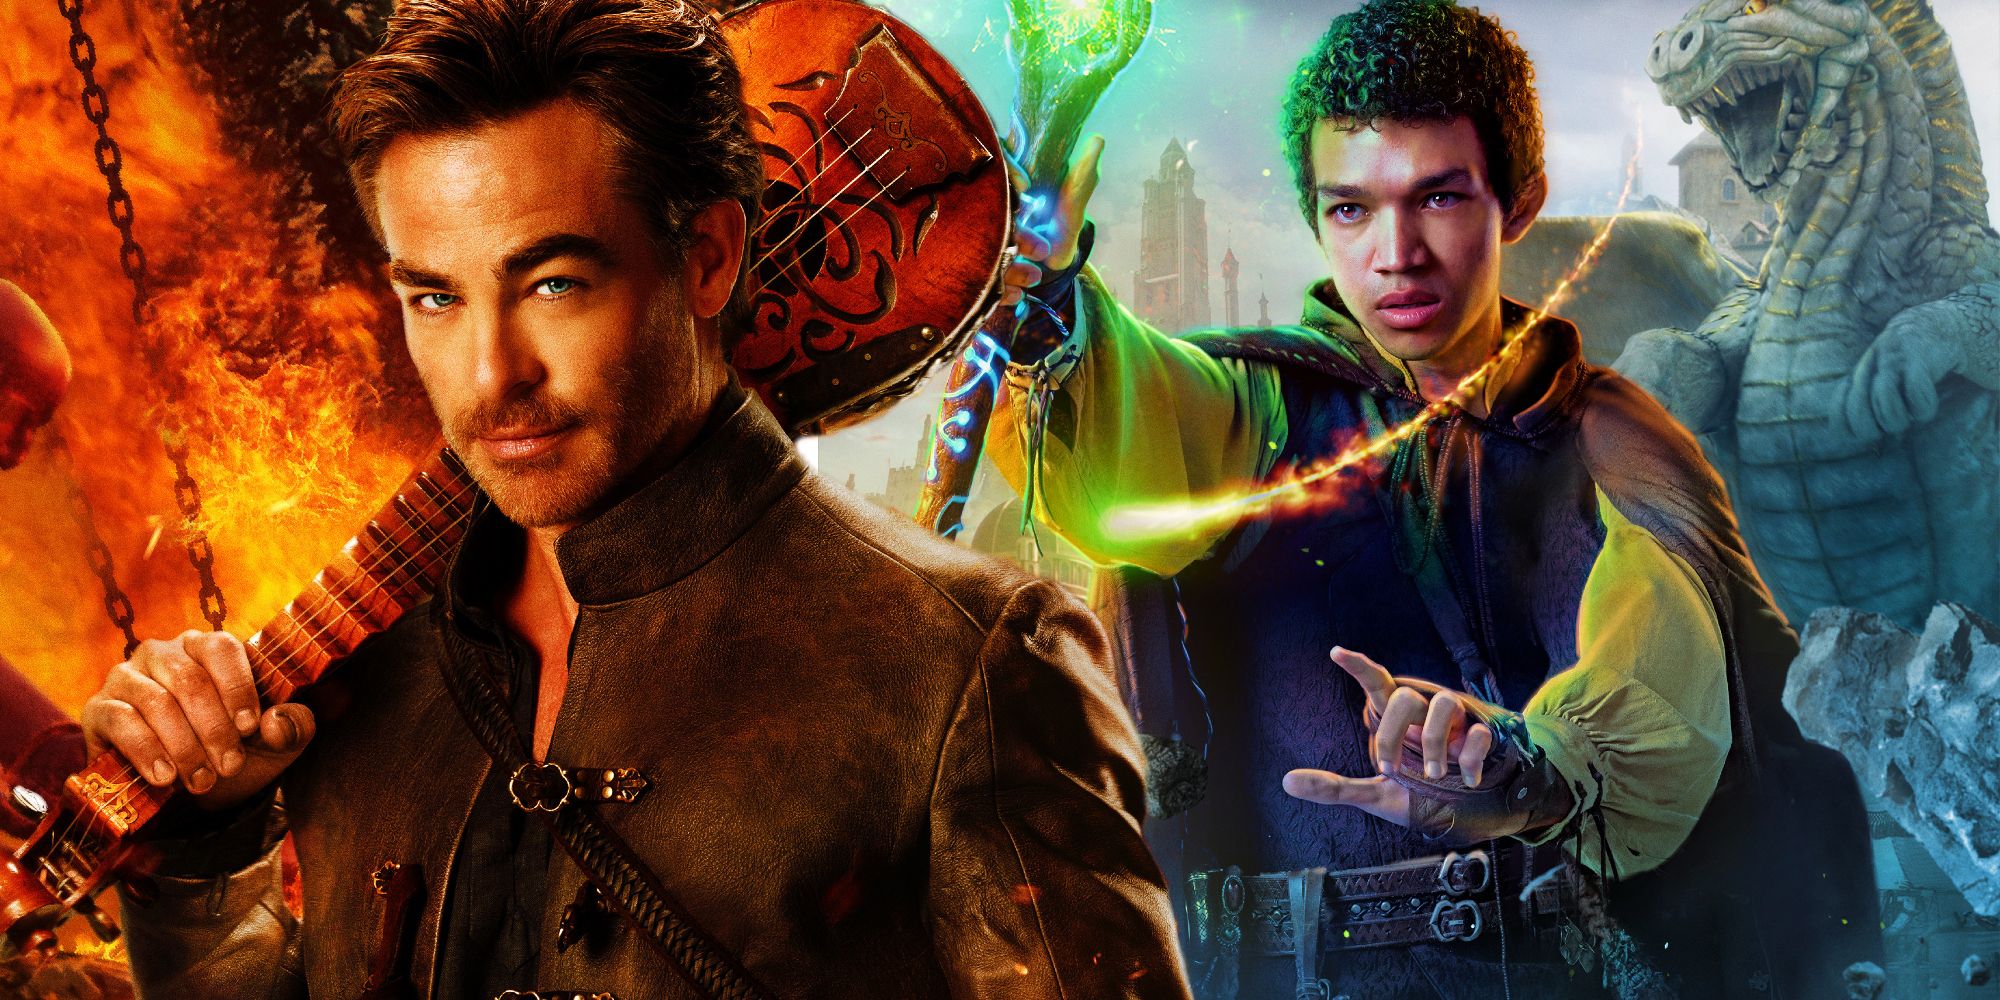 Simon and Edgin in their character posters for Dungeons & Dragons: Honor Among Thieves